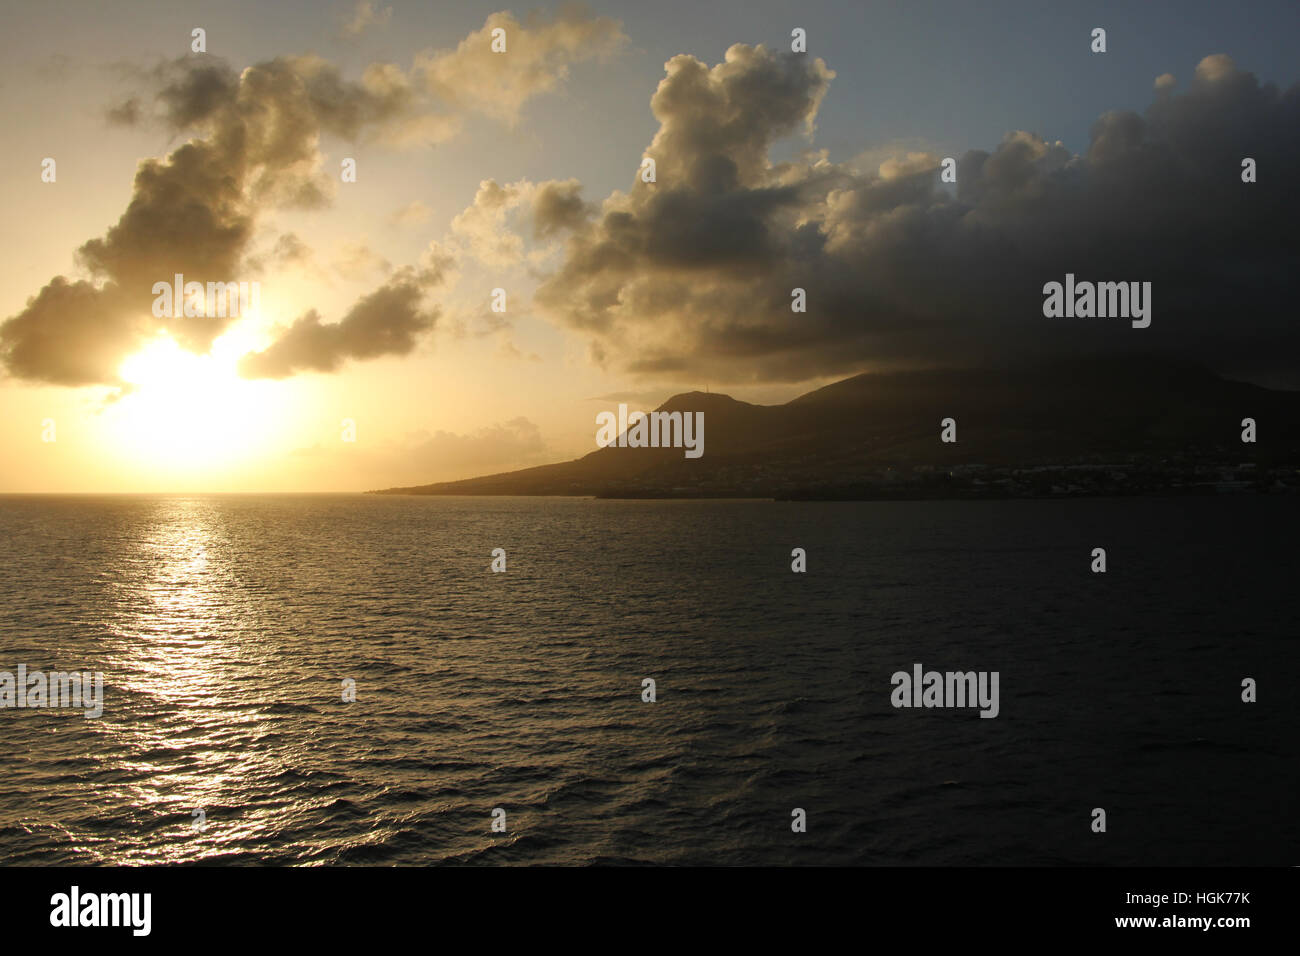 Sunset over the island of St Kitts, with beautiful reflections on the ocean, Caribbean. Stock Photo